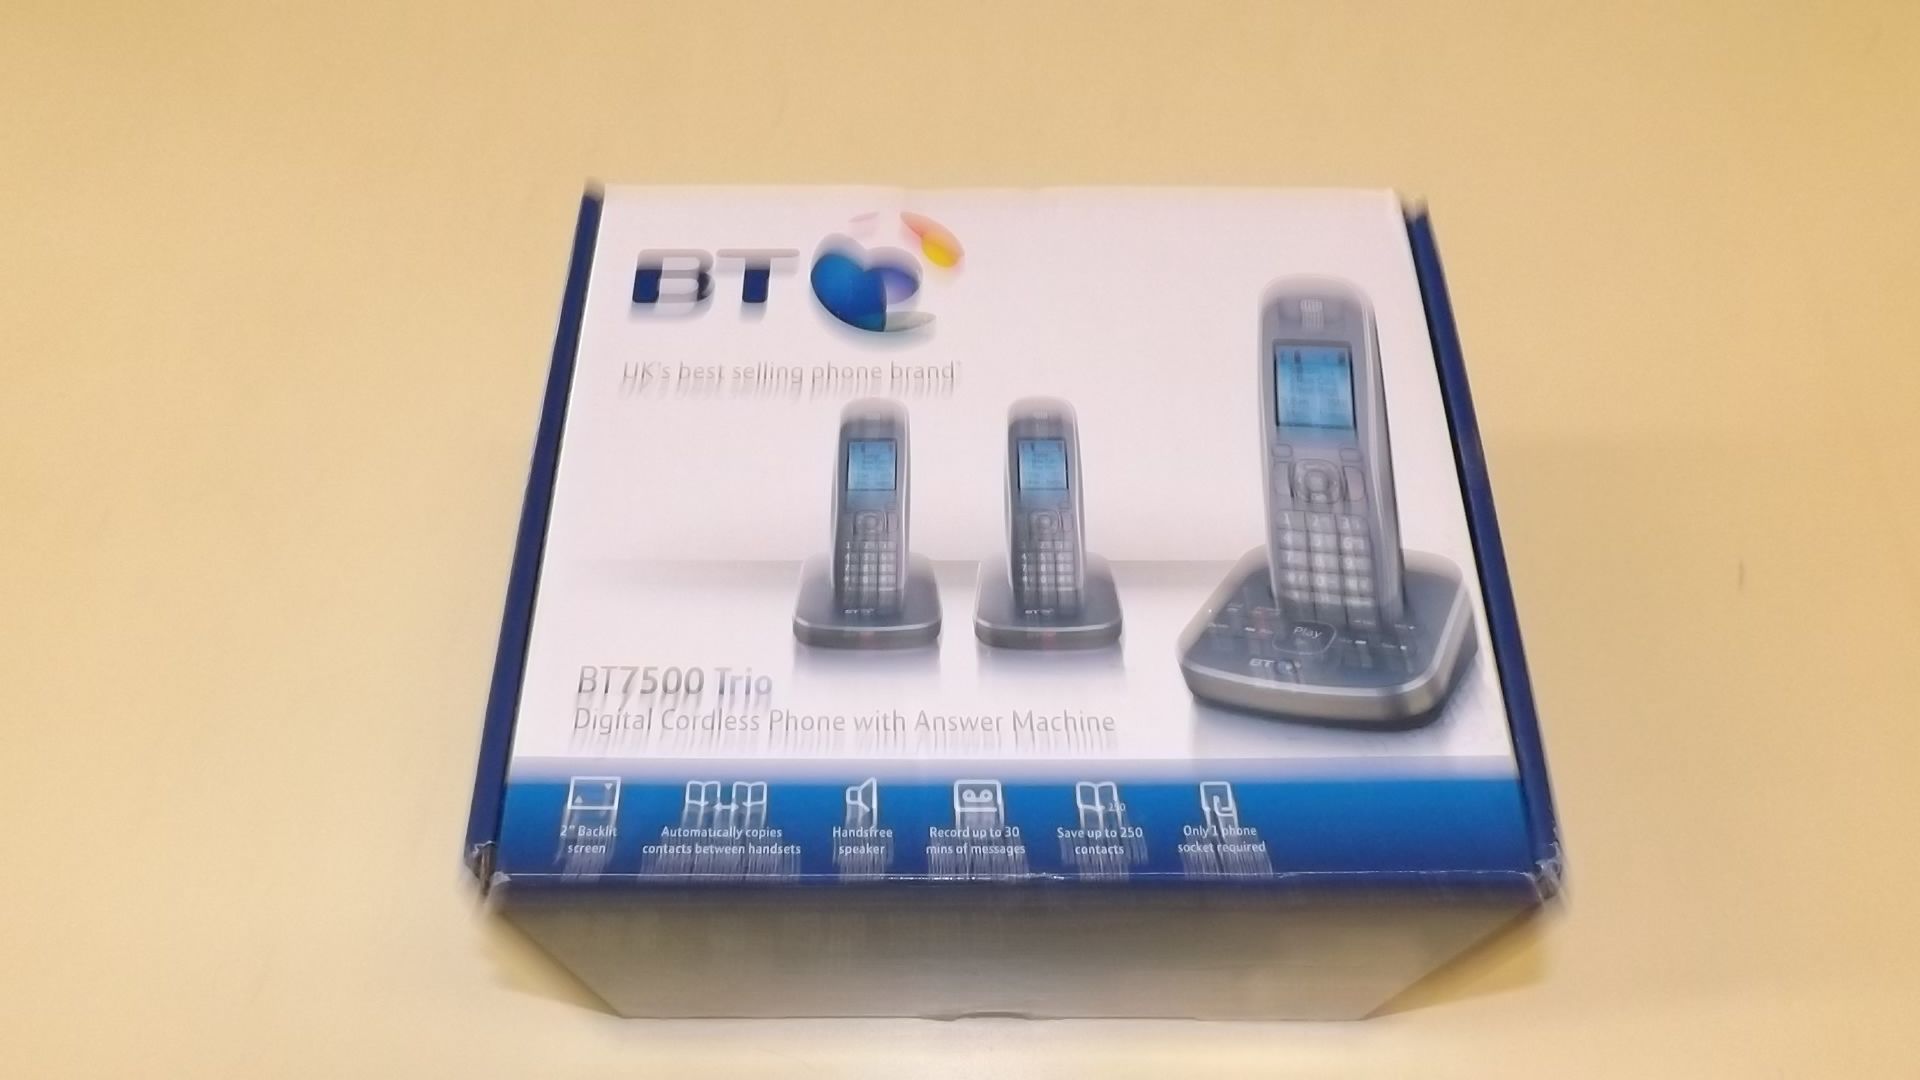 1 BOXED BT 7500 TRIO DIGITAL CORDLESS ANSWER PHONE SYSTEM RRP £149.99